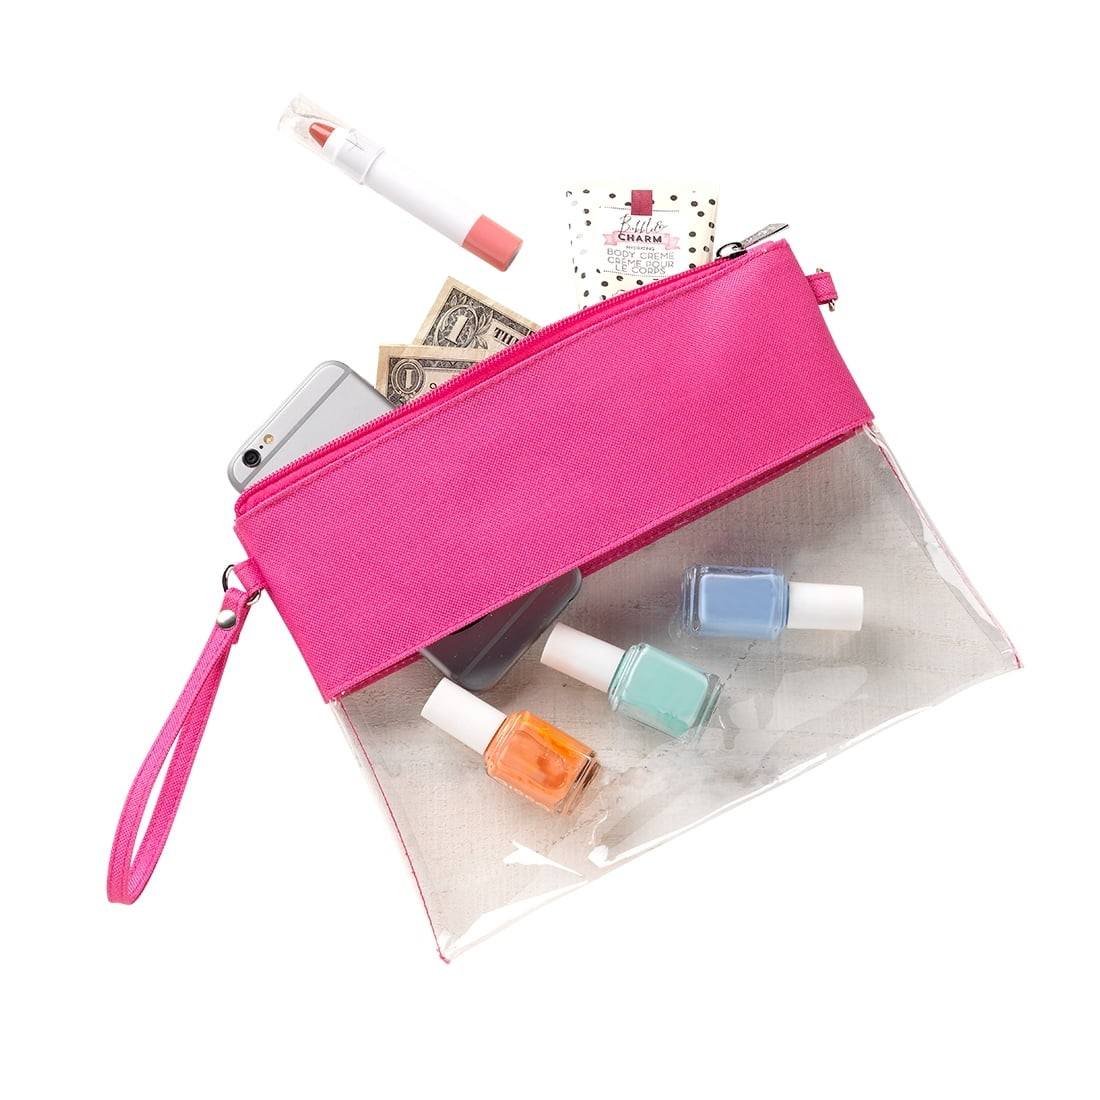 Clear Purse with Crossbody Strap image # 61342